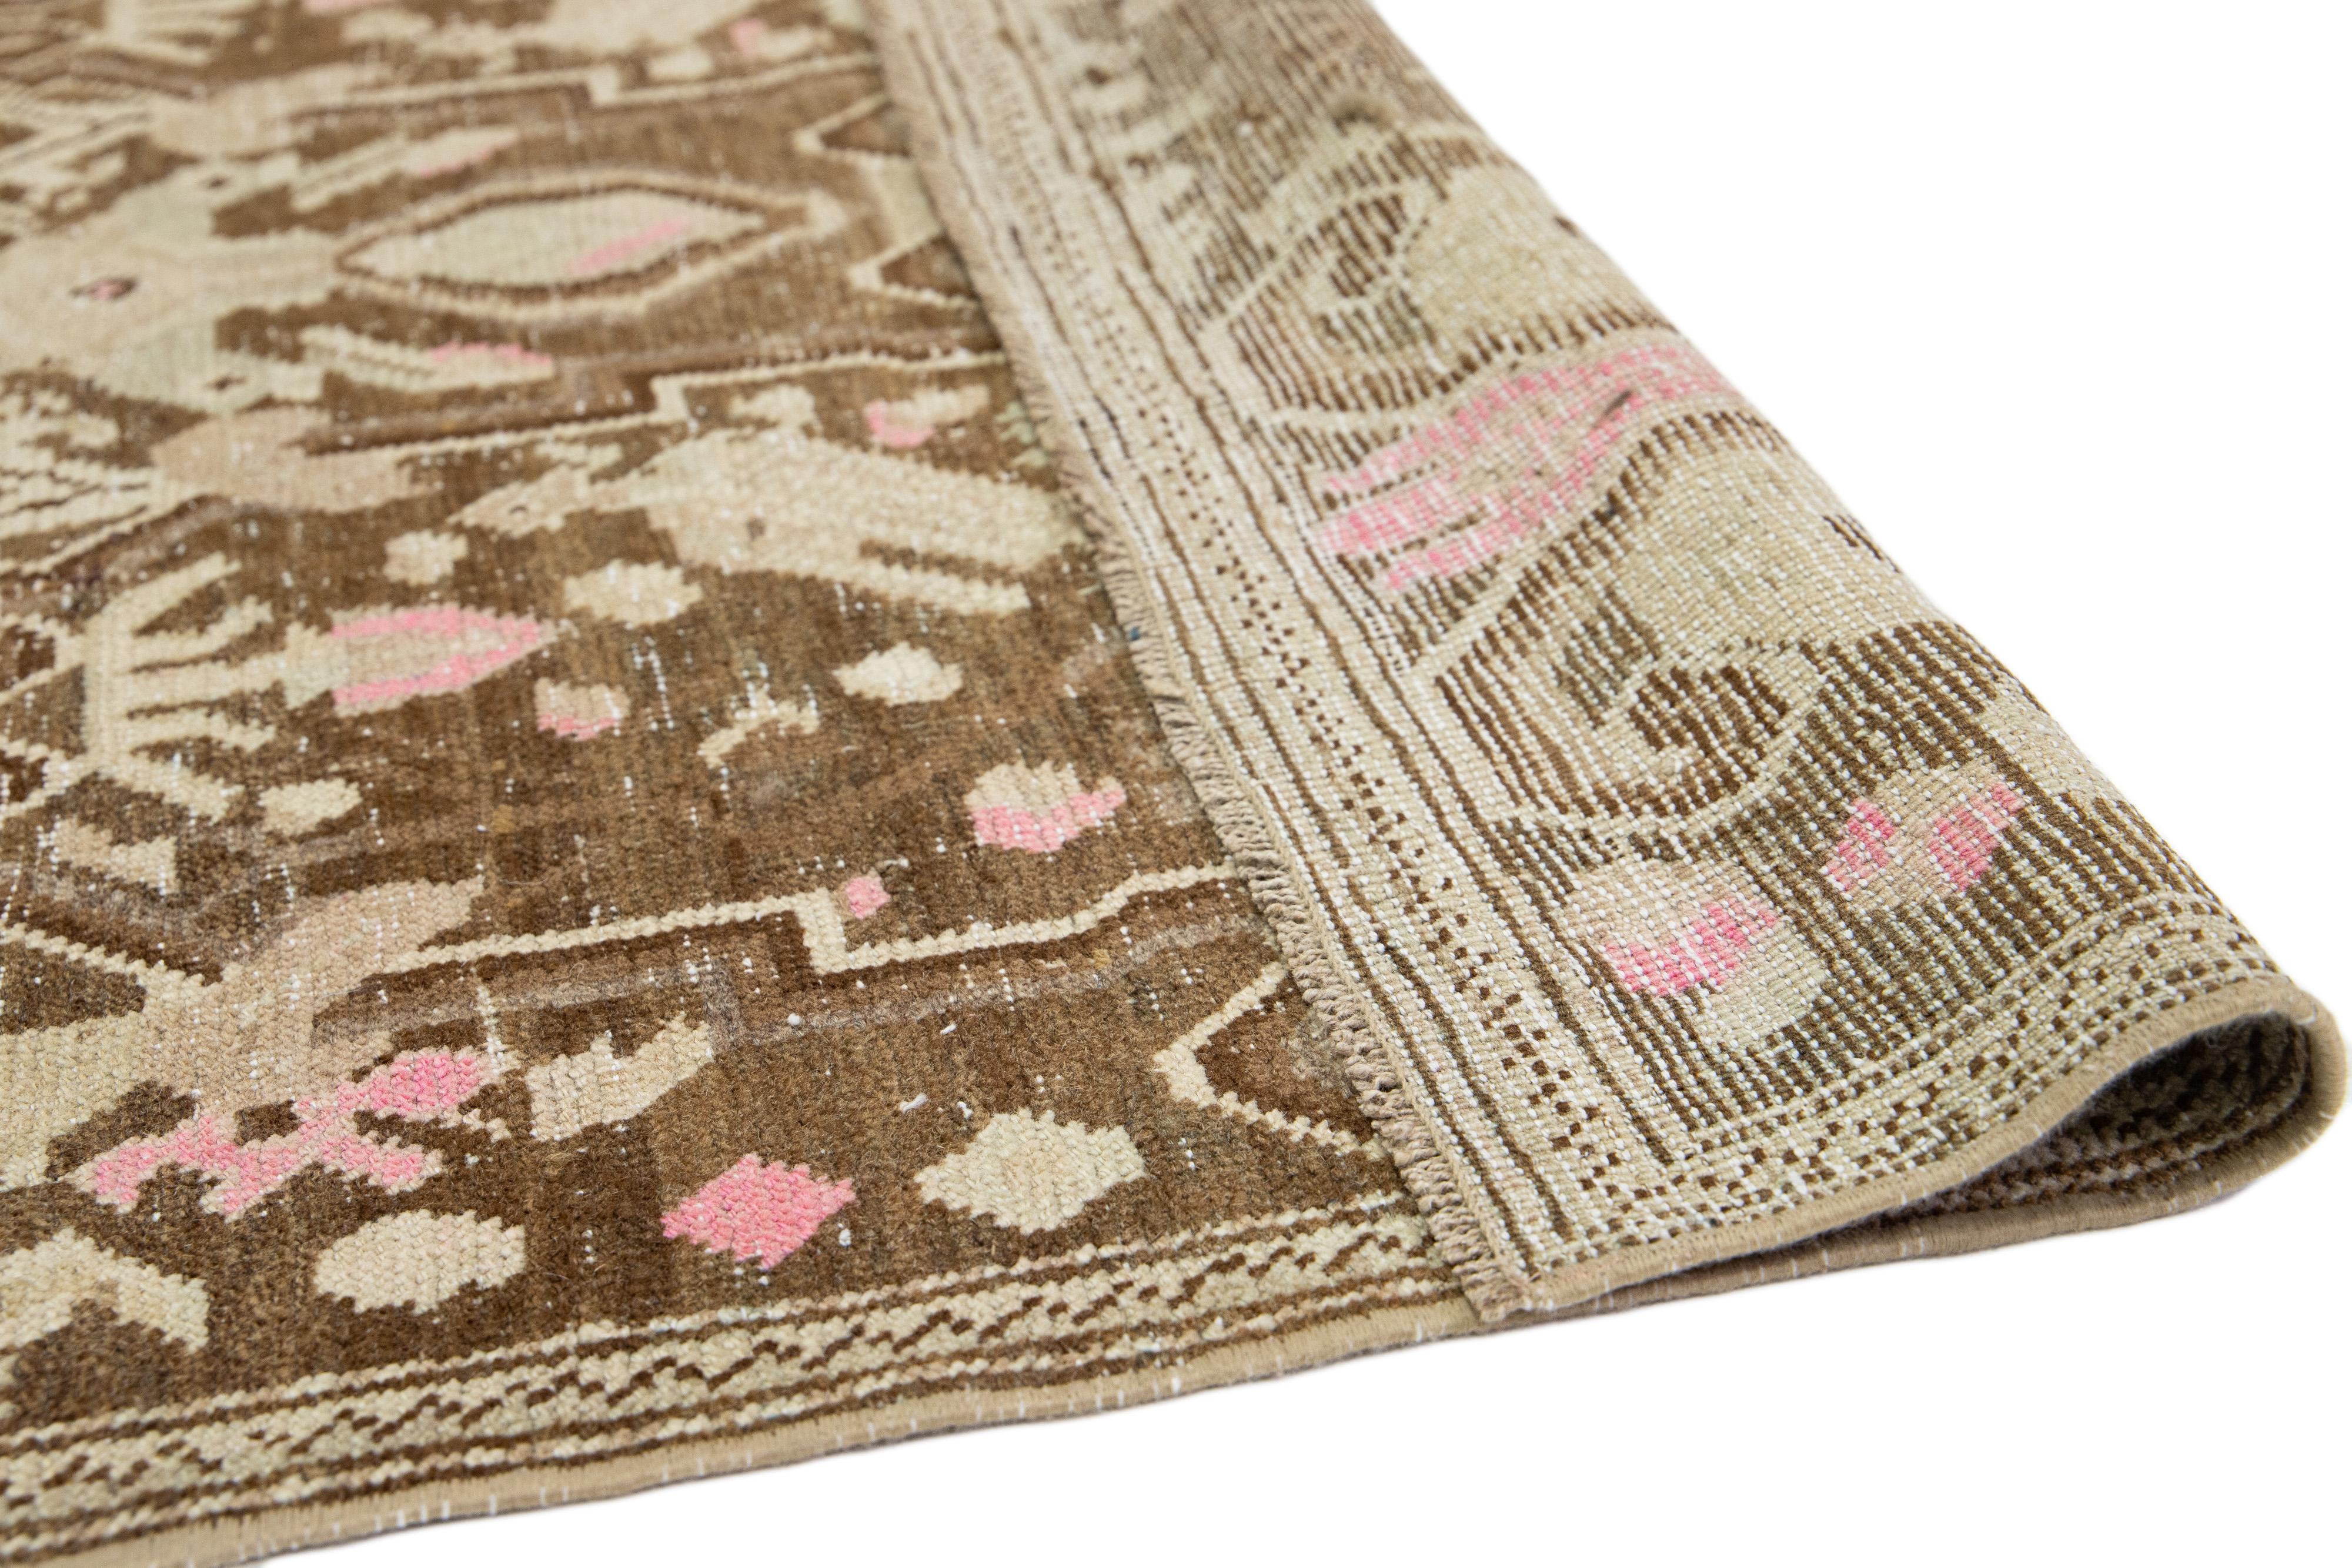 Azerbaijani Allover 1920s Antique  Karabagh Handmade Wool Runner In Brown And Pink  For Sale